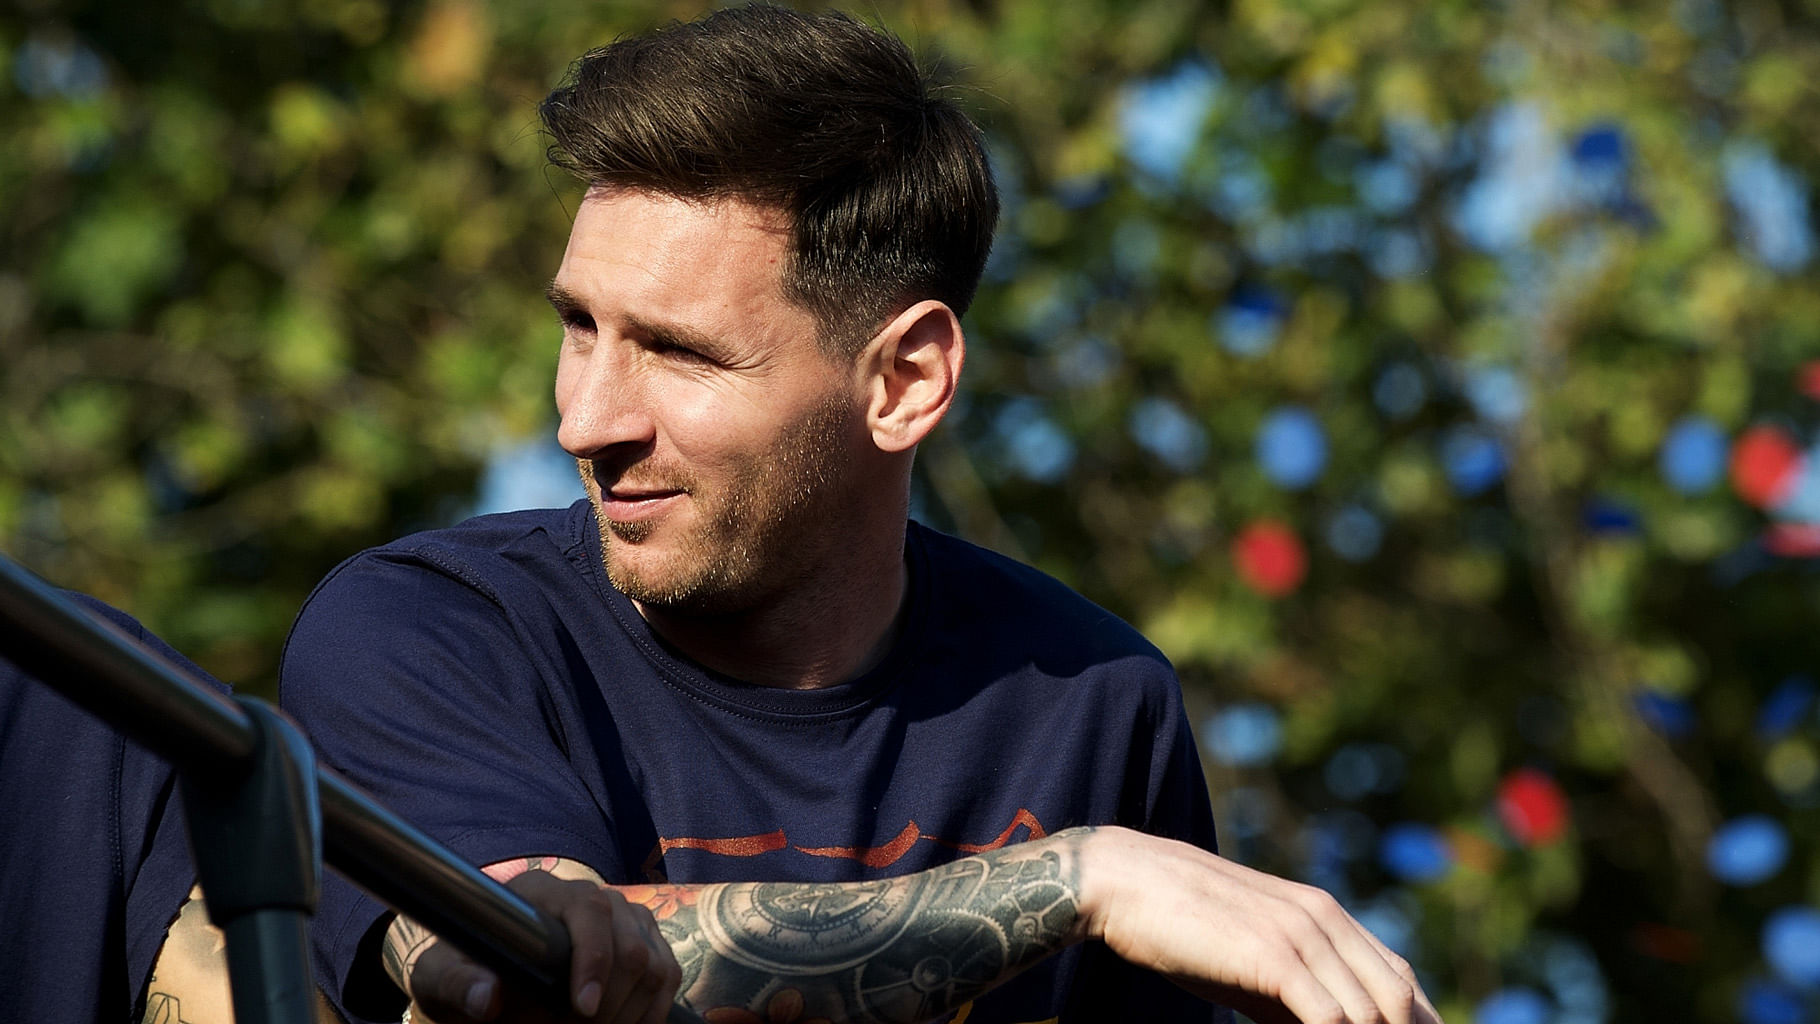 Argentine superstar Lionel Messi has emerged as the most desirable footballer for Indian women, in a poll conducted by an online matrimony platform. (Photo: IANS)